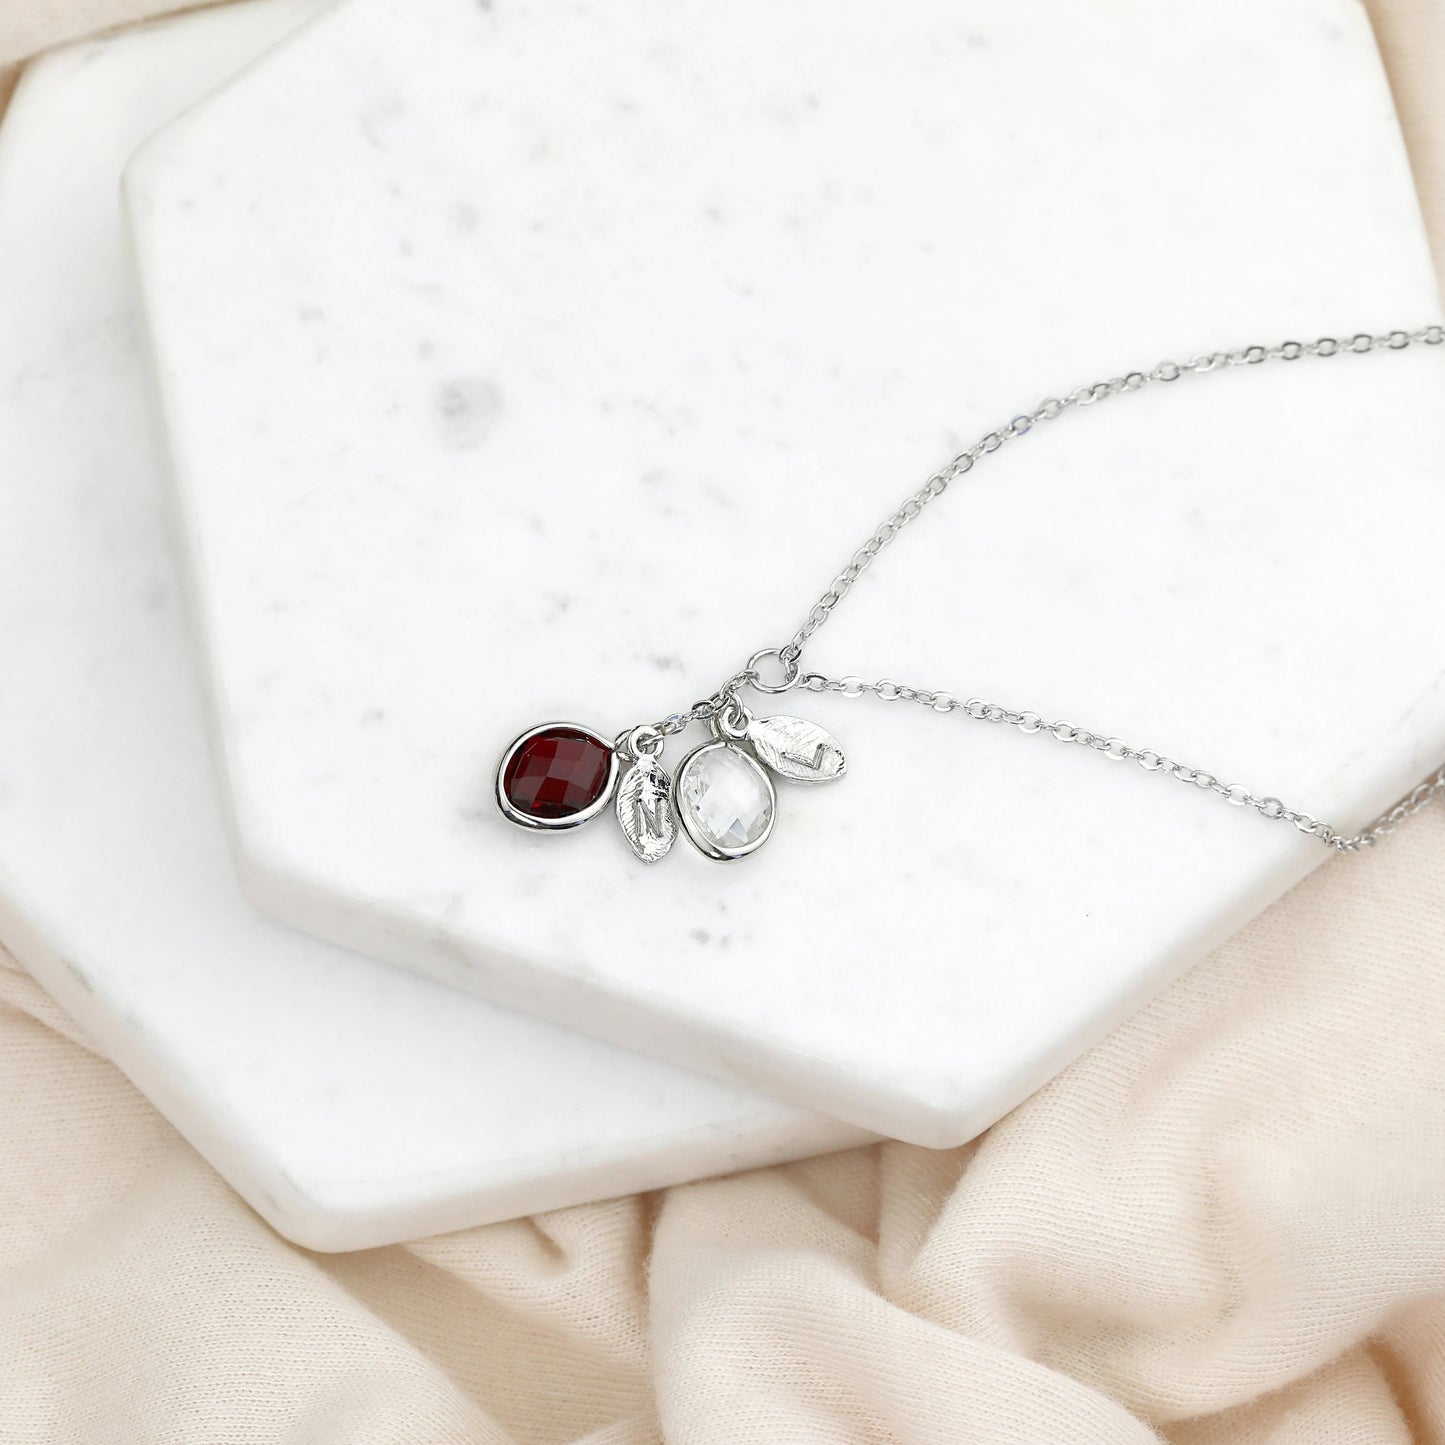 Birthstone Necklace for Mom, Personalized Gifts for Her, Family Birthstone Jewelry for Grandma, Grandparent Gifts, Unique Best Holiday Gift